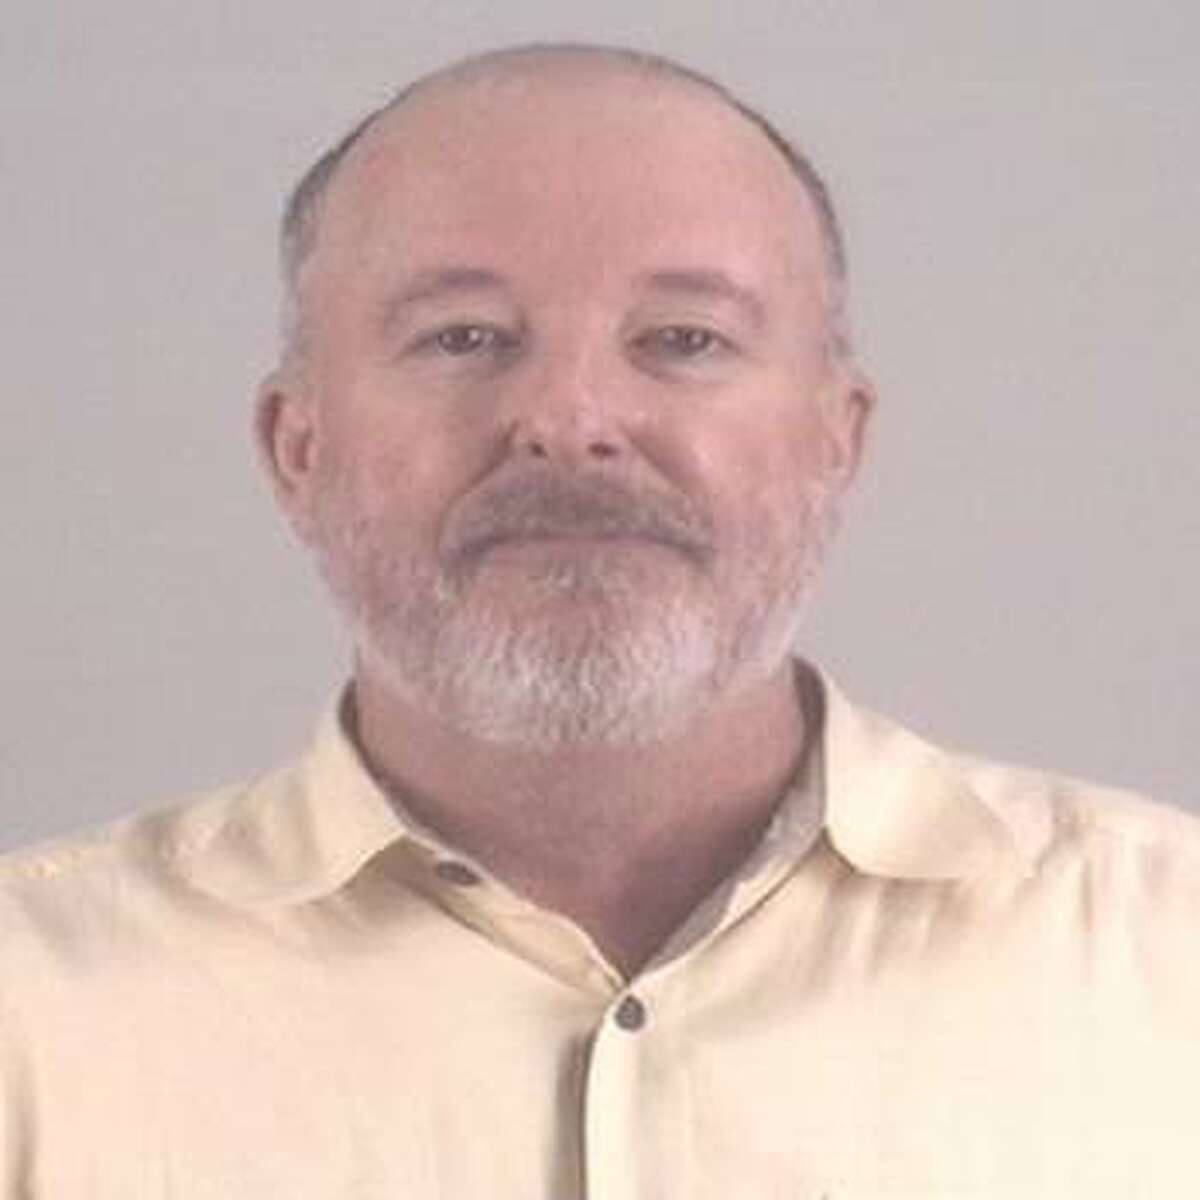 Kelly Dan Williams Jr., 62, was booked into Mansfield Jail on June 4, 2015 and was later indicted on two counts of sexual exploitation of children in July 2015.